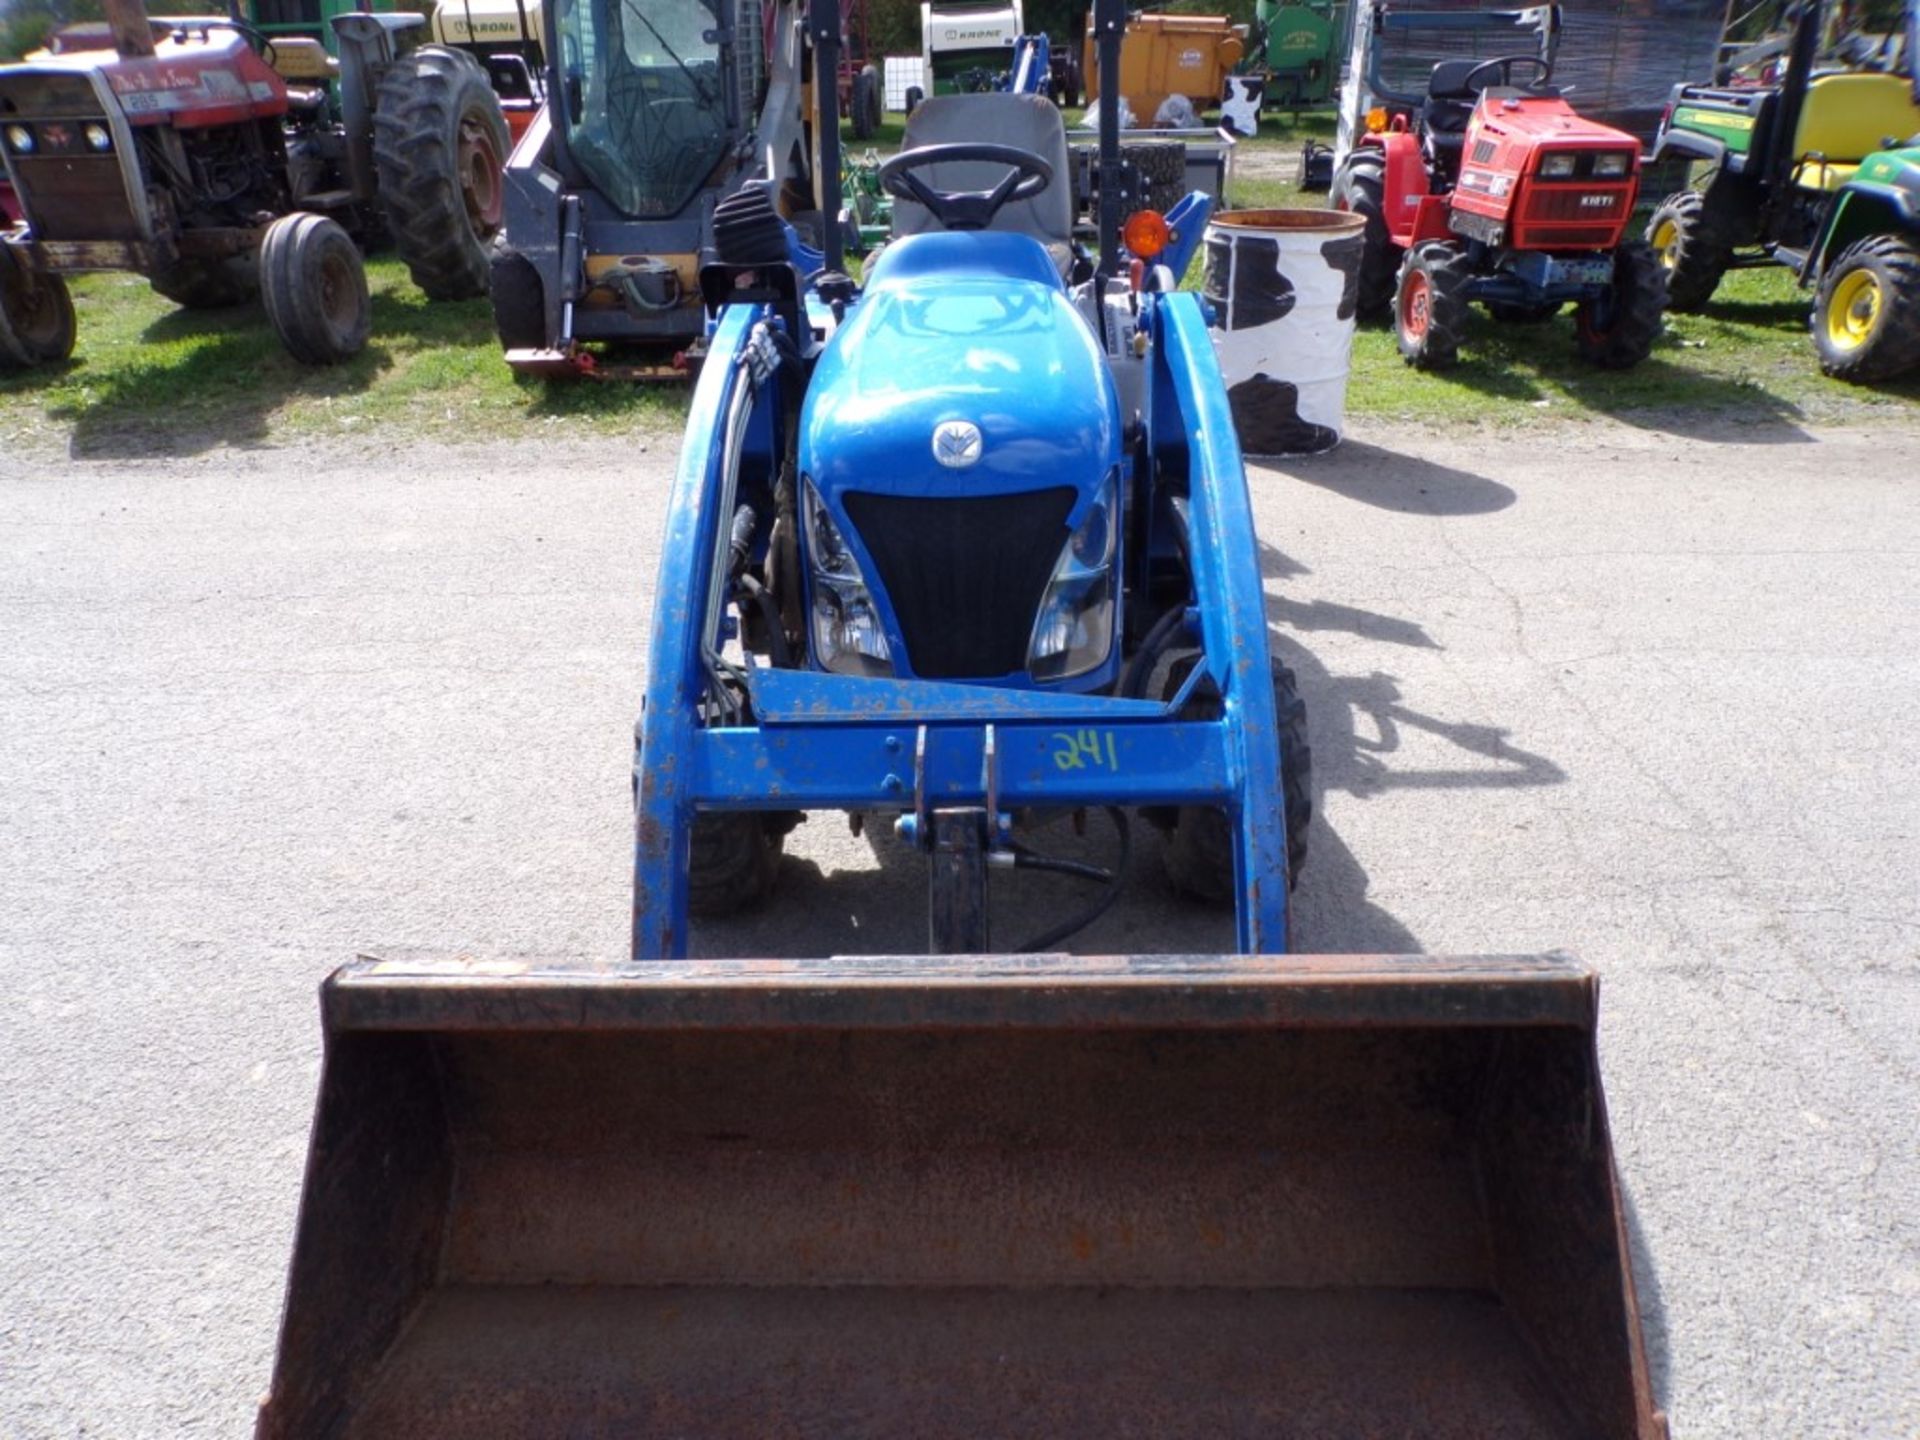 New Holland Boomer 1025 Tractor, 4 WD, Shibaura Dsl. Engine, N.H. 210TL Loader ARms And 48'' Bucket, - Image 2 of 6